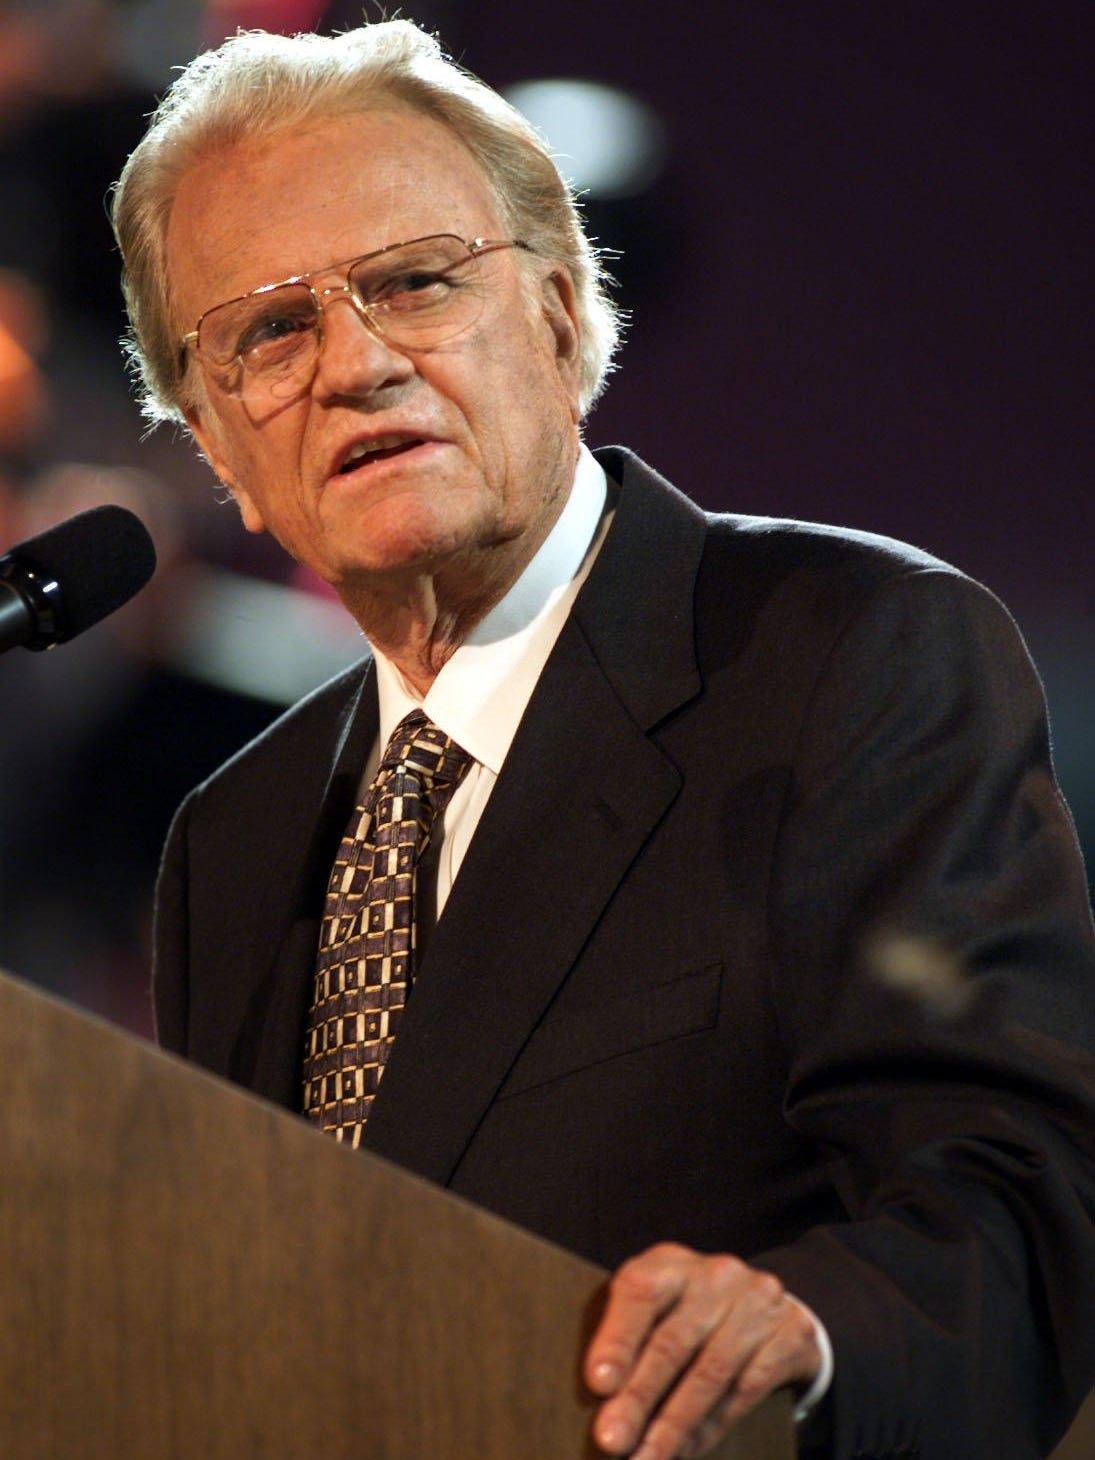 DOWNLOAD MP3: ARE YOU OFFENDED BY THE CROSS By Evangelist Billy Graham(sermon) 18